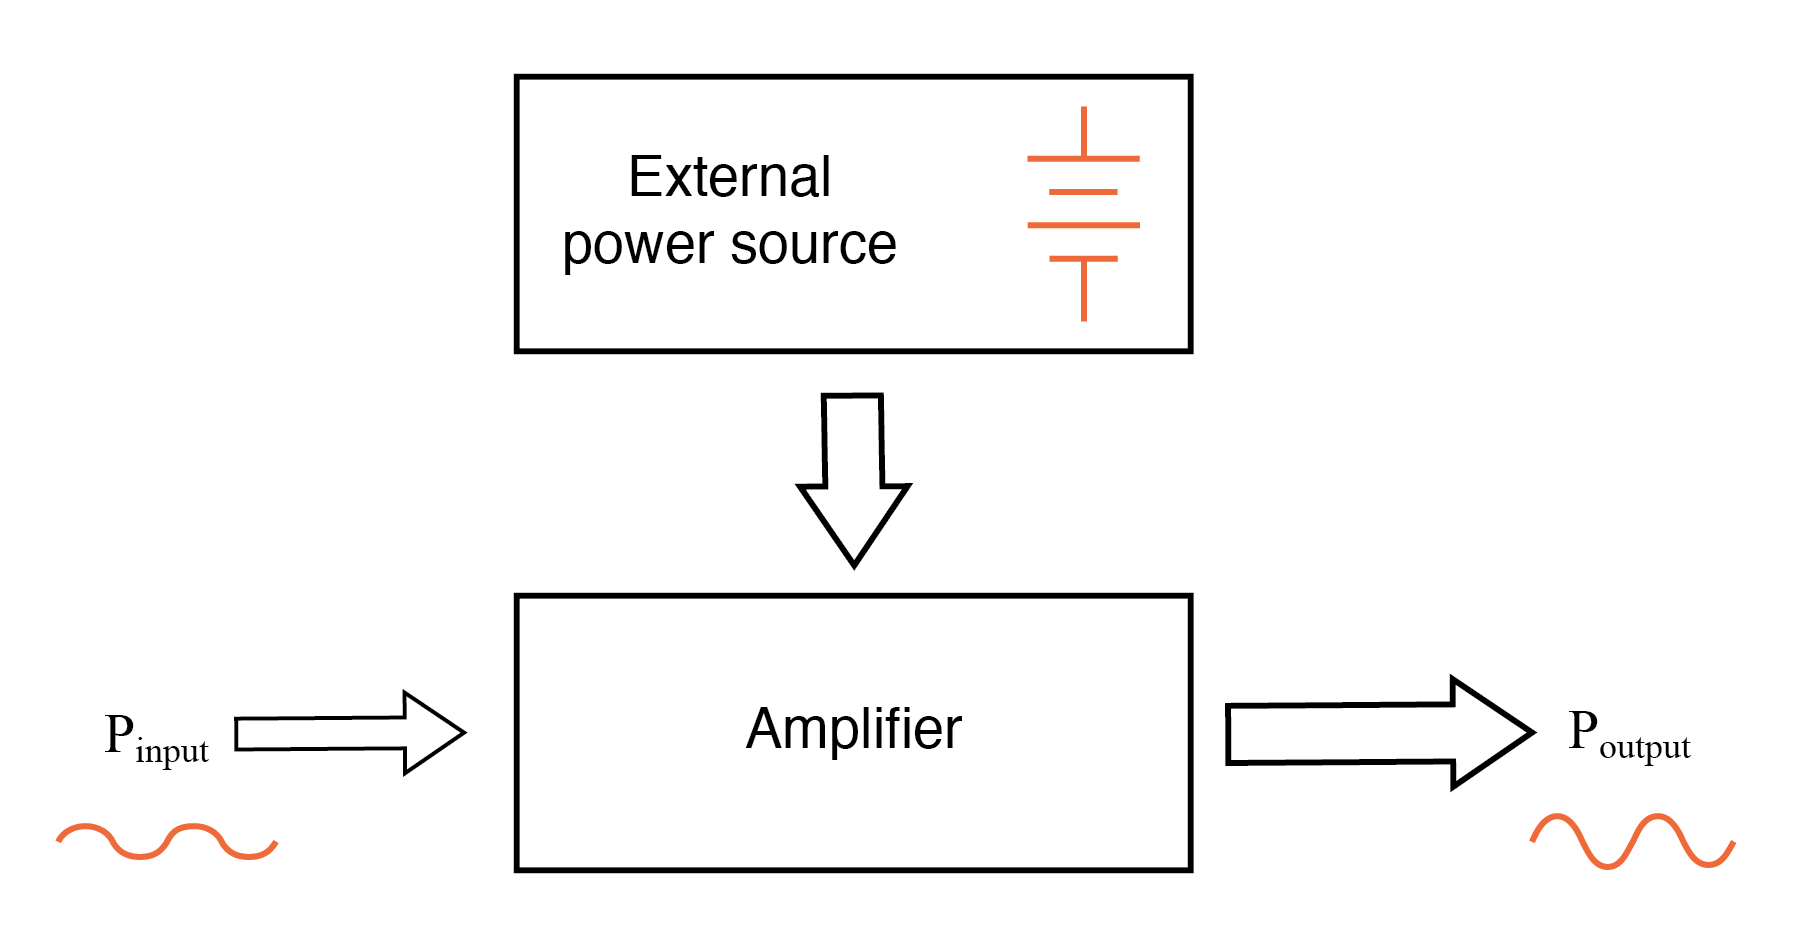 While an amplifier can scale a small input signal to large output, its energy source is an external power supply.